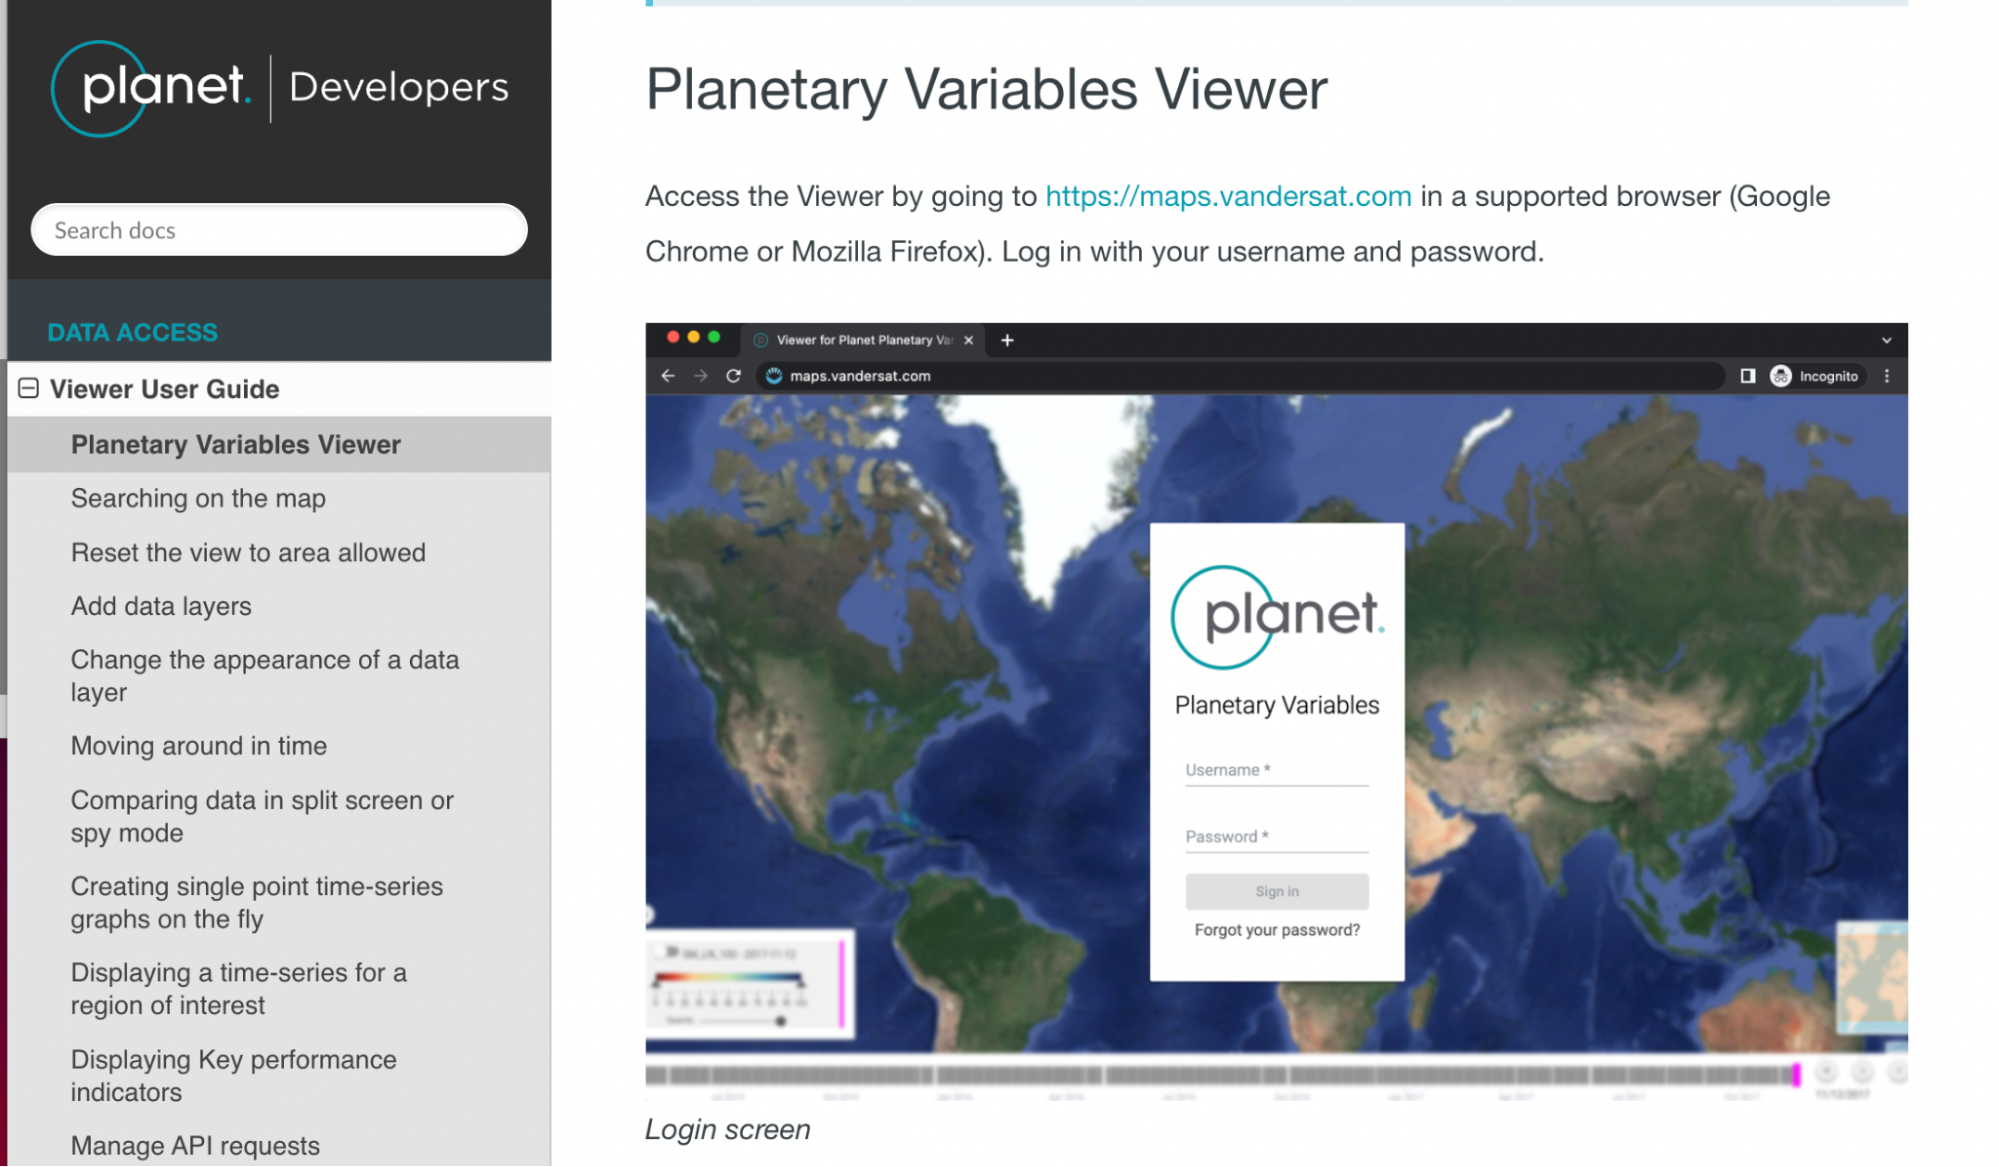 Access the Planetary Variables Viewer by going to https://maps.vandersat.com in a supported browser (Google Chrome or Mozilla Firefox). Log in with your username and password.